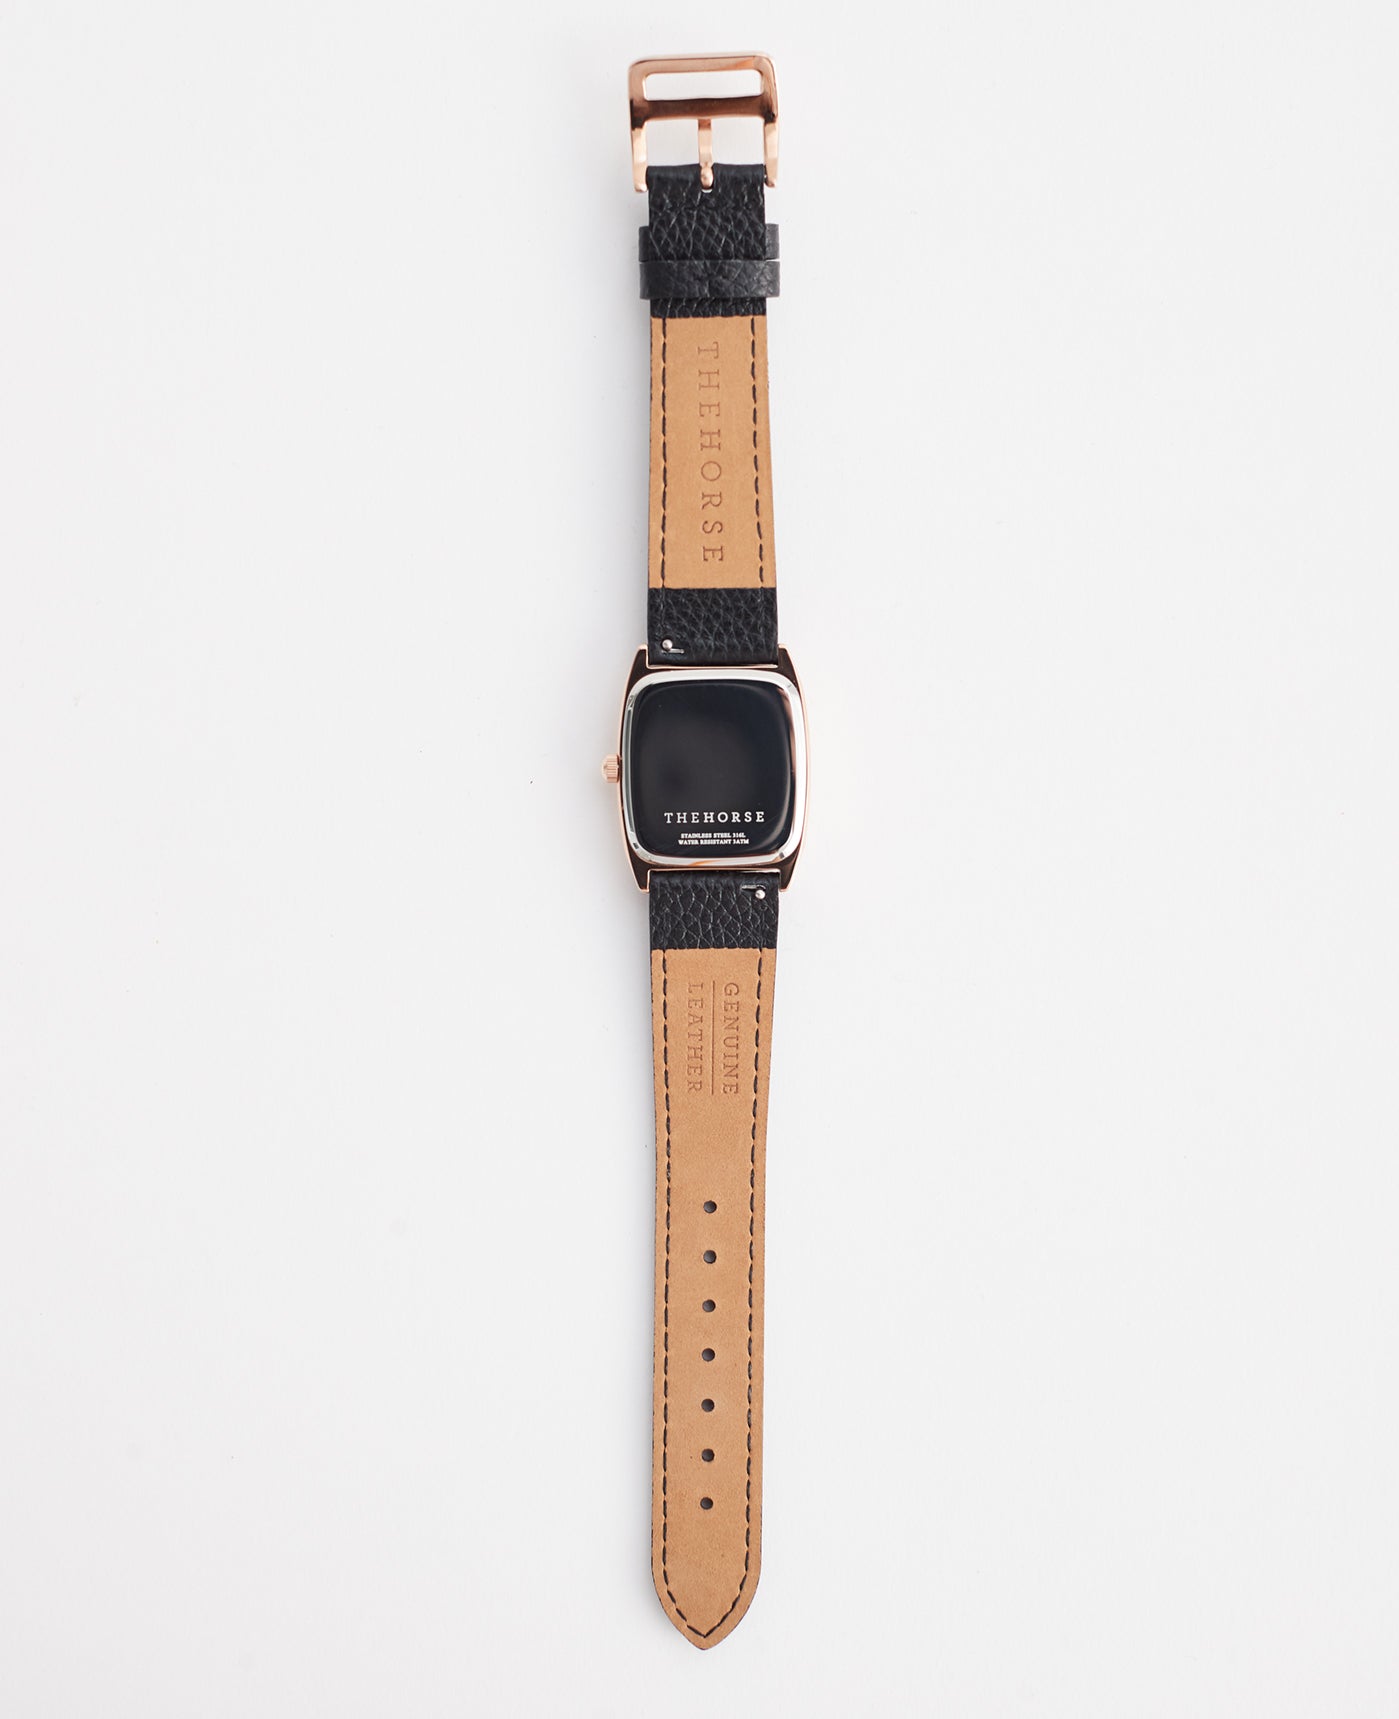 The Dress Watch: Rose Gold / White Dial / Black Leather